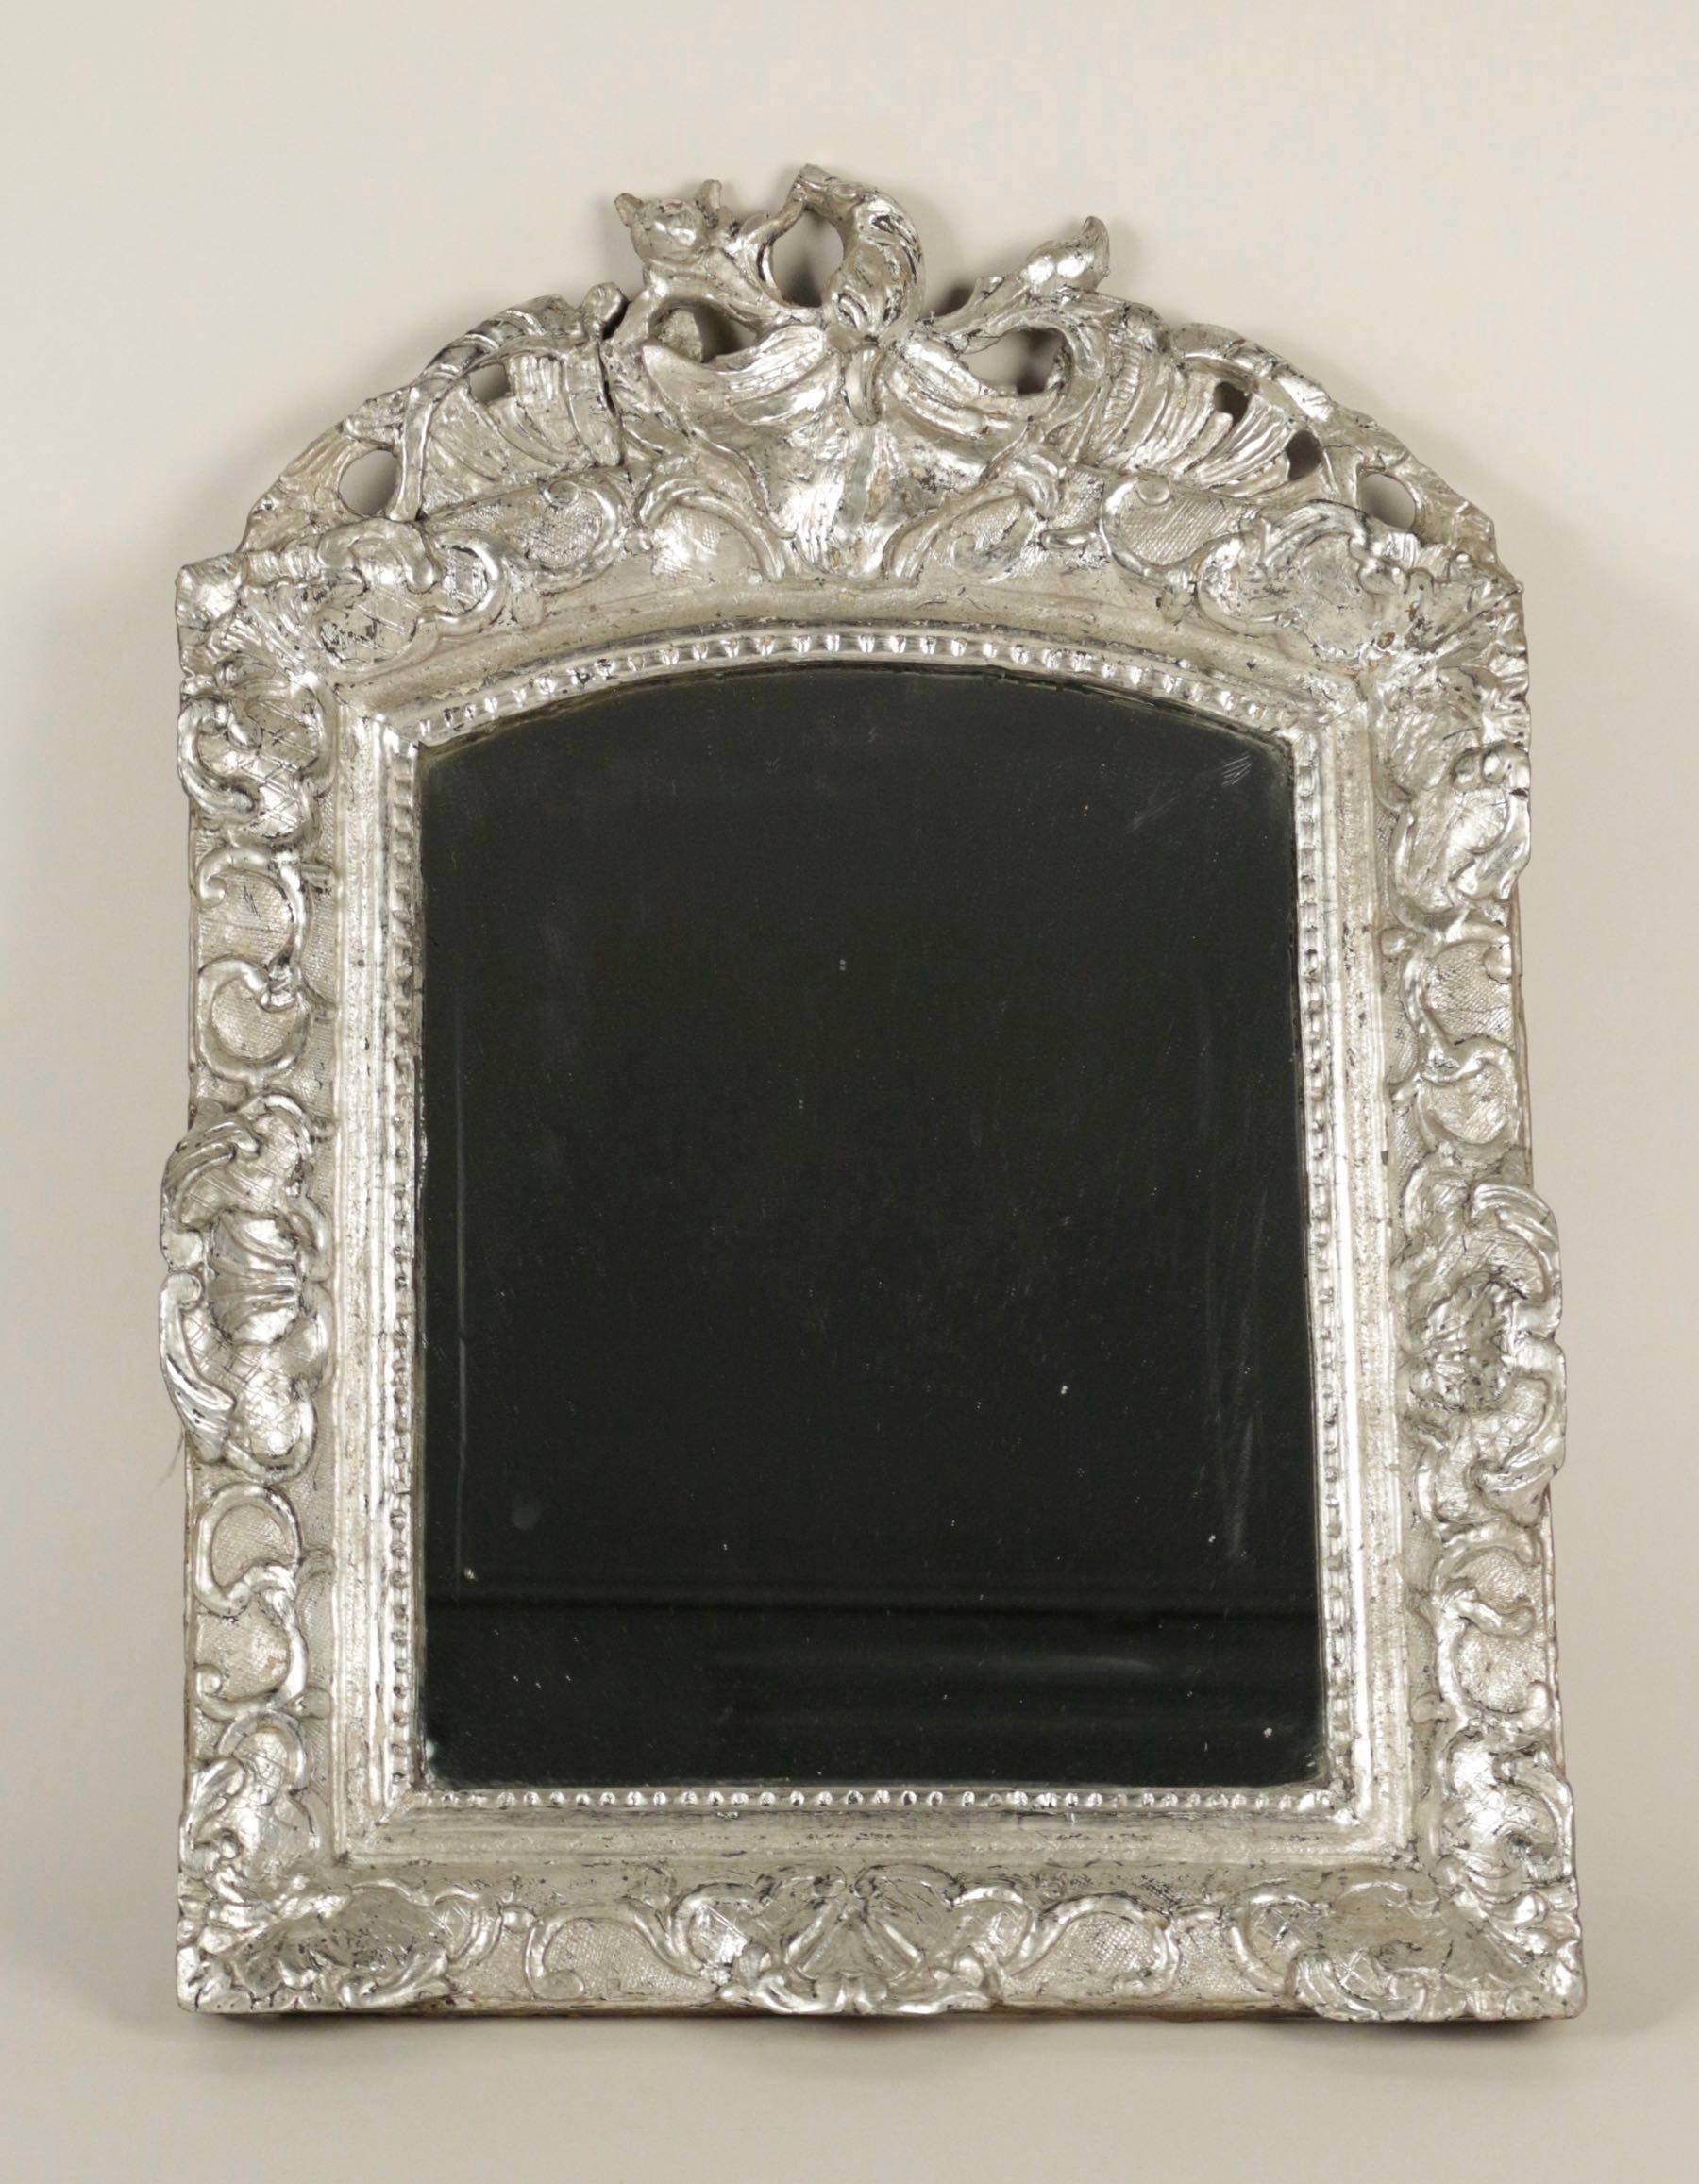 Lovely small silvered wood mirror with original mercury glass. The hand-carved frame representing Berain decor style.
French Louis XV period, mid-18th century, circa 1760.